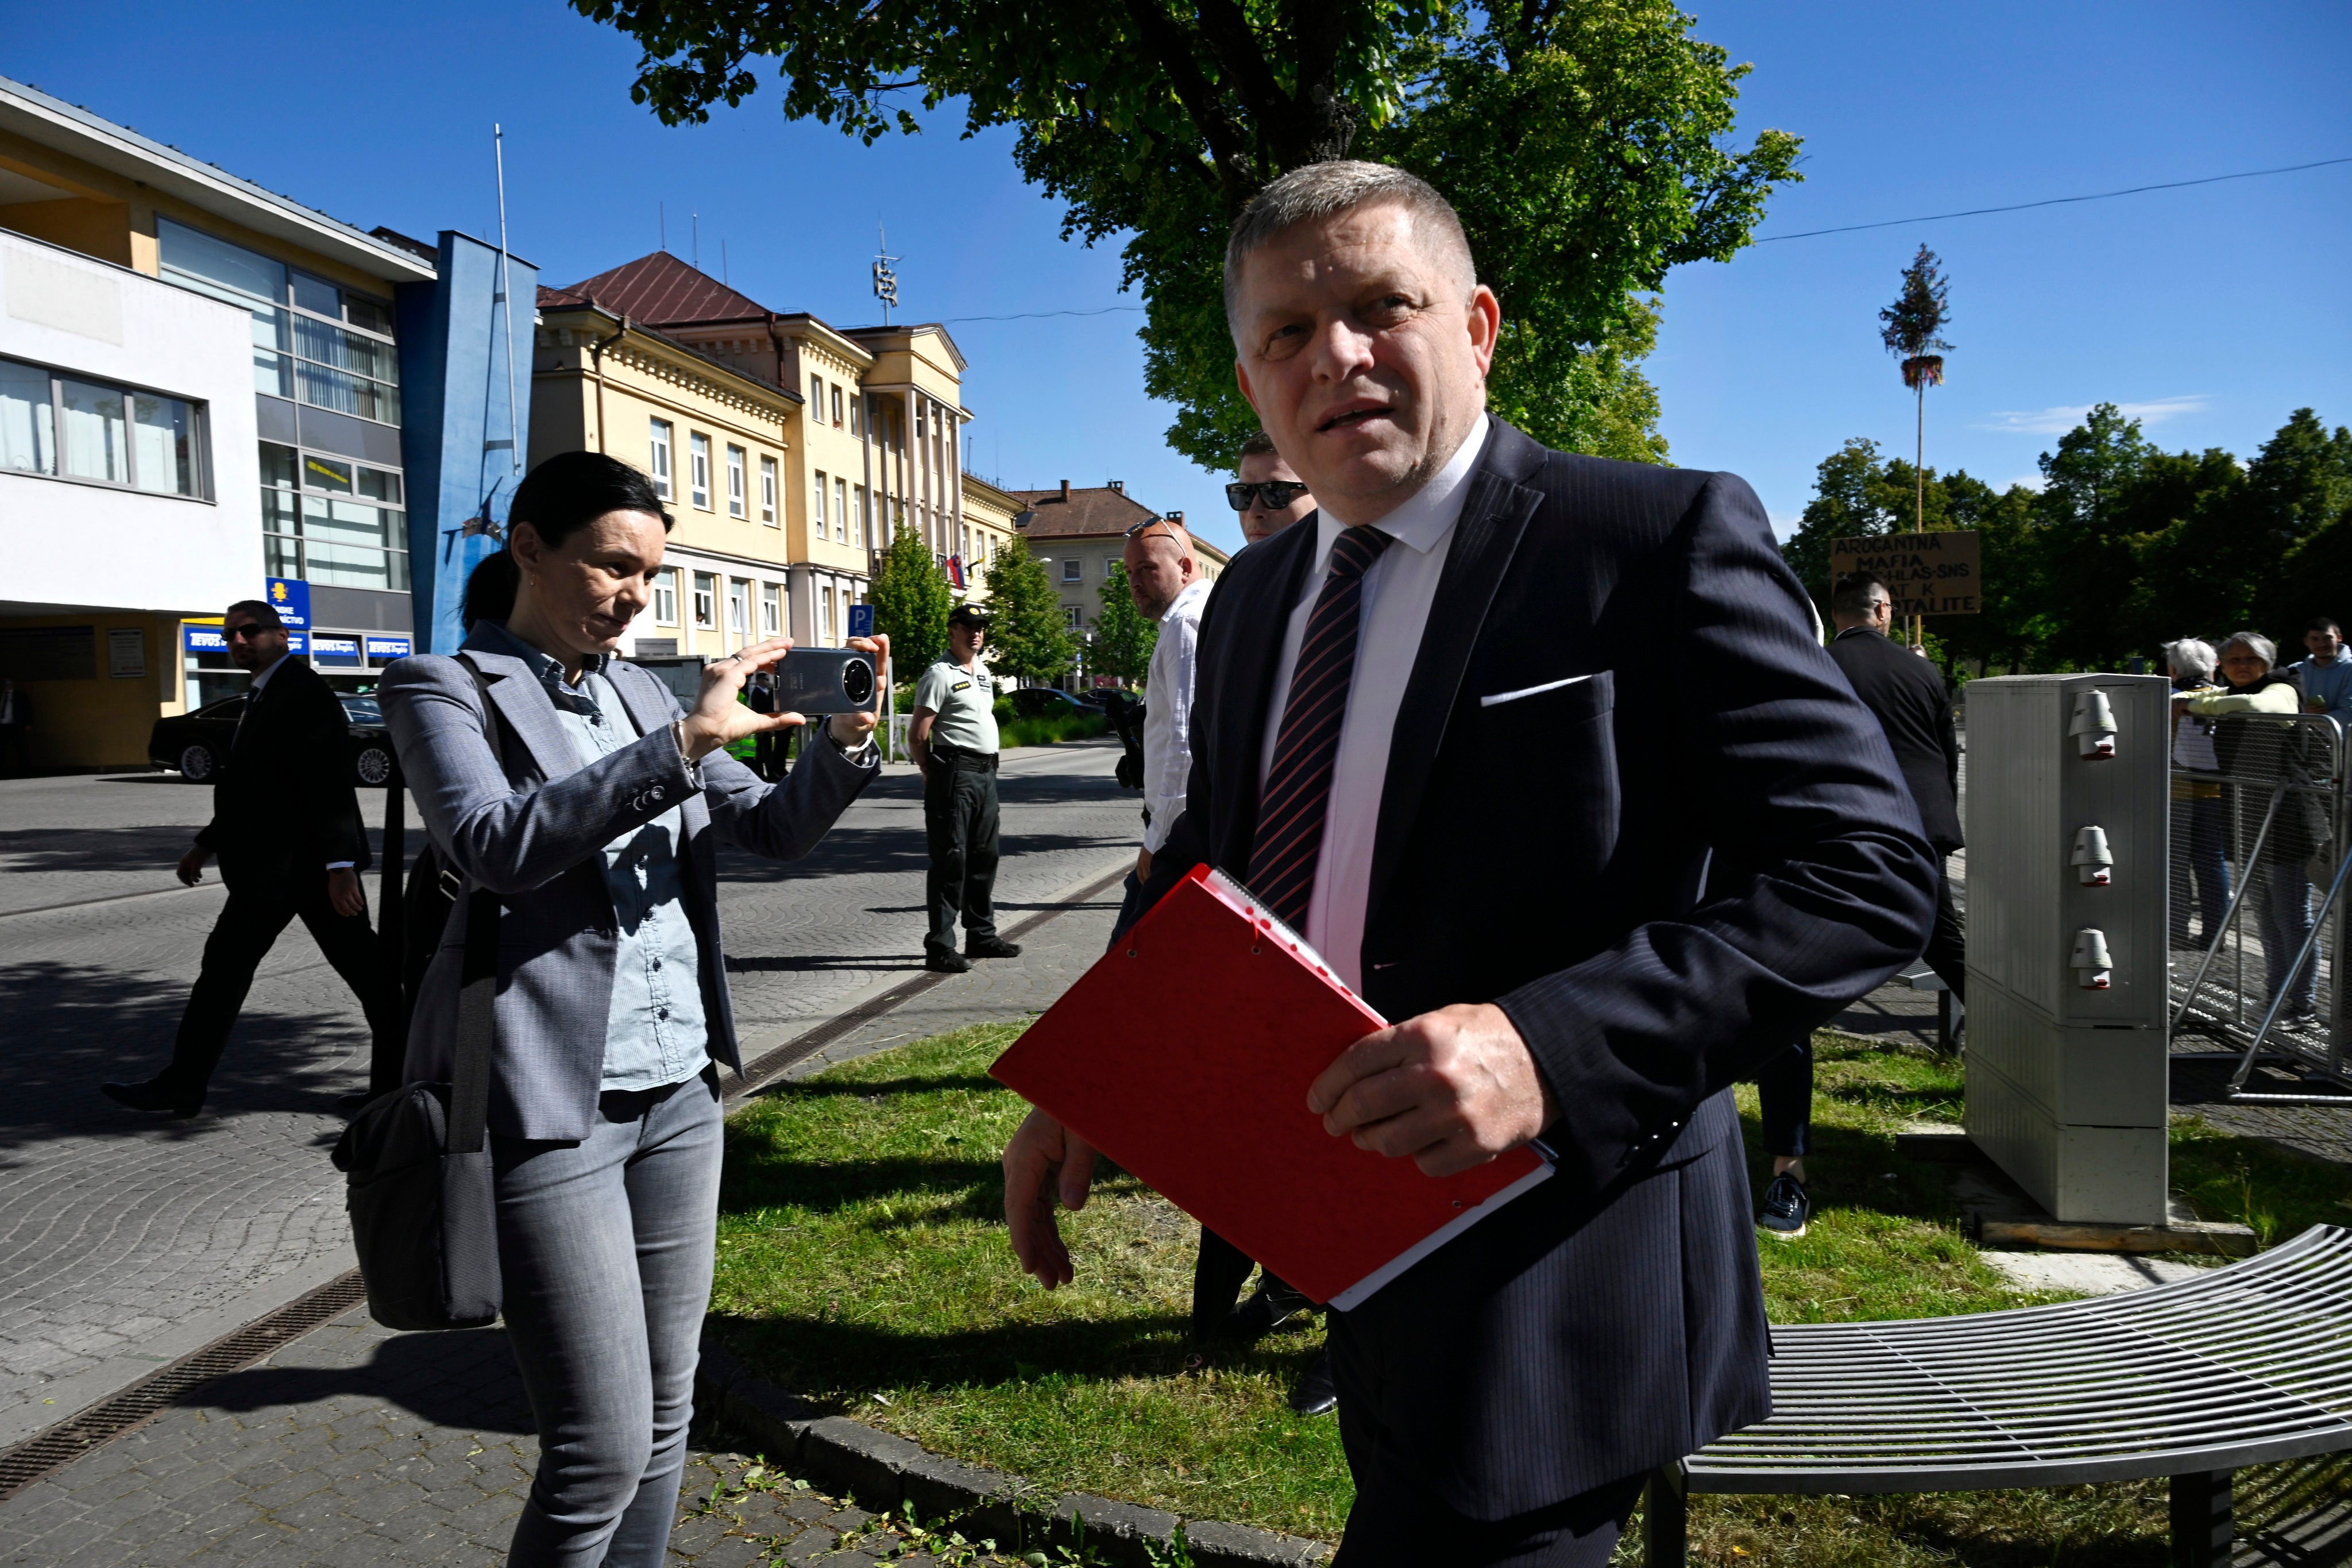 Slovakia’s Prime Minister Robert Fico arrives for a cabinet session in the town of Handlova. Photo: AP